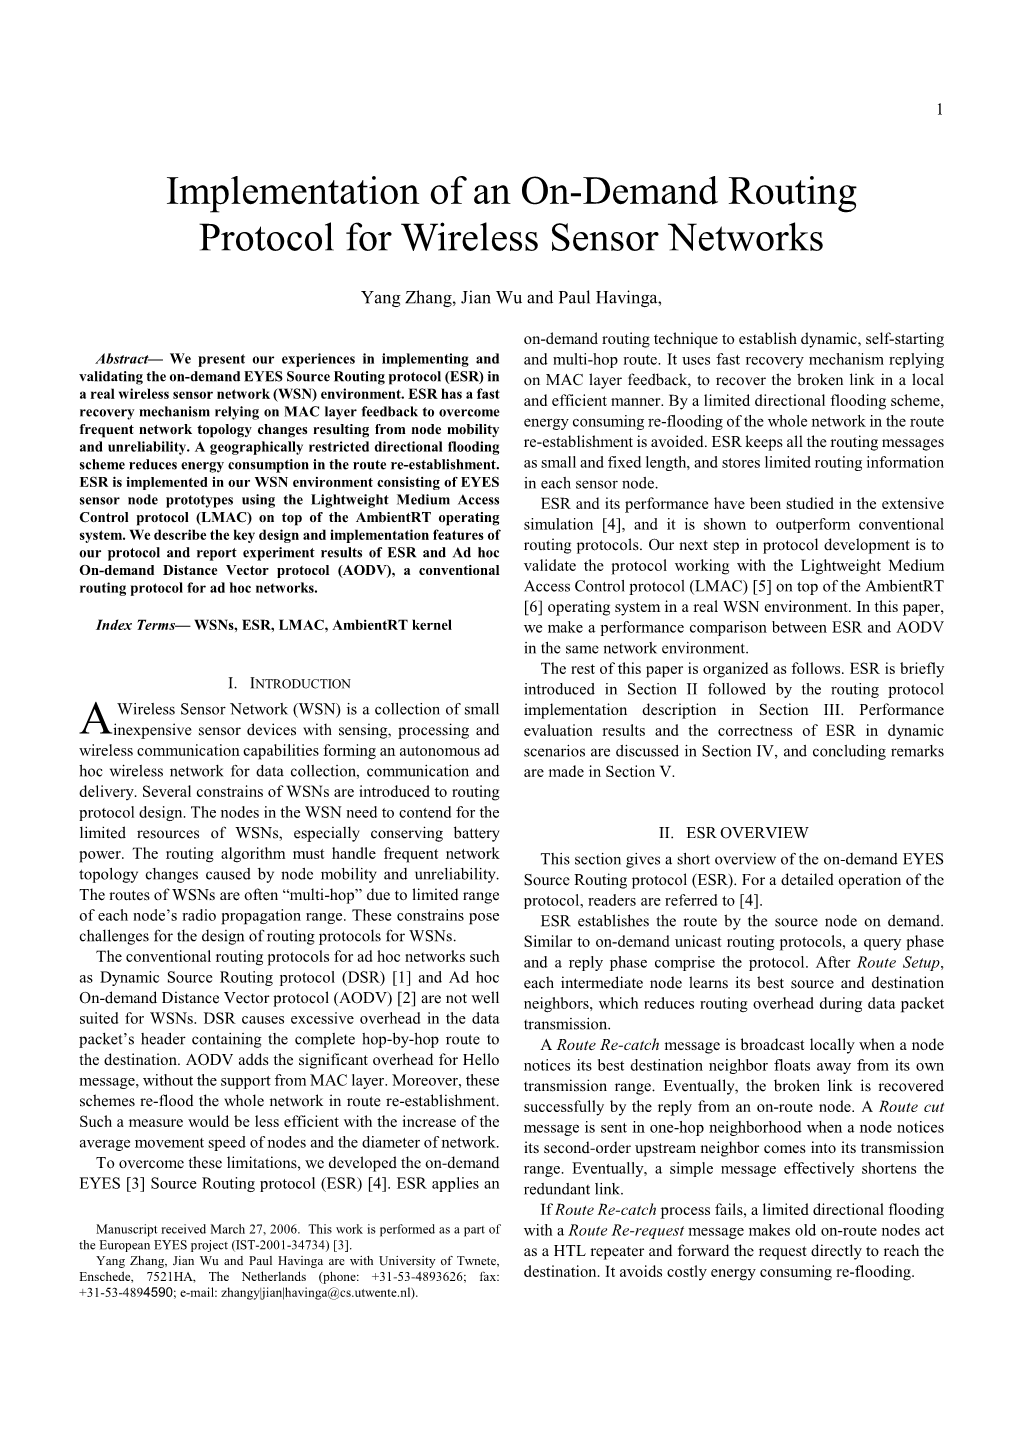 Implementation of an On-Demand Routing Protocol for Wireless Sensor Networks